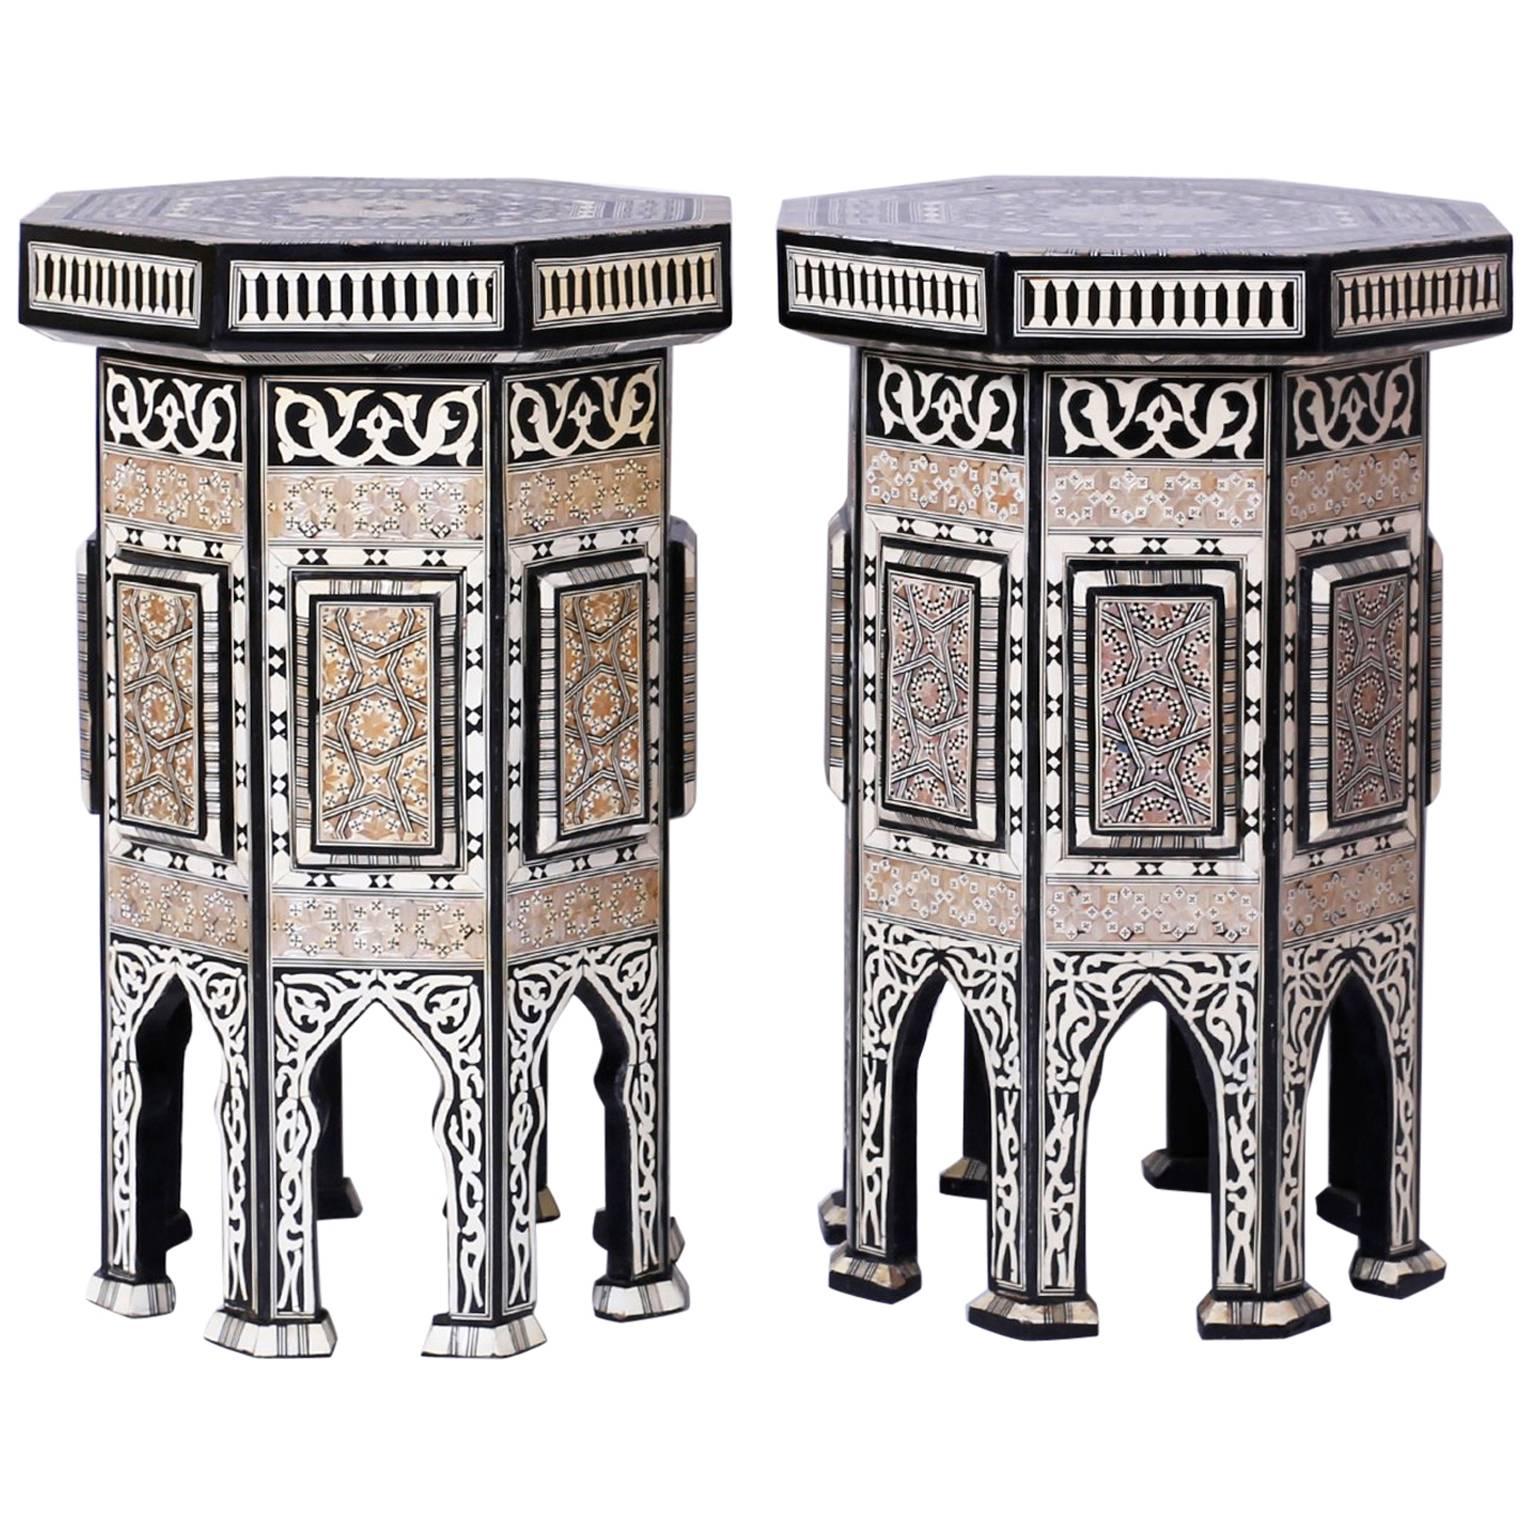 Pair of Syrian Inlaid Tables or Stands